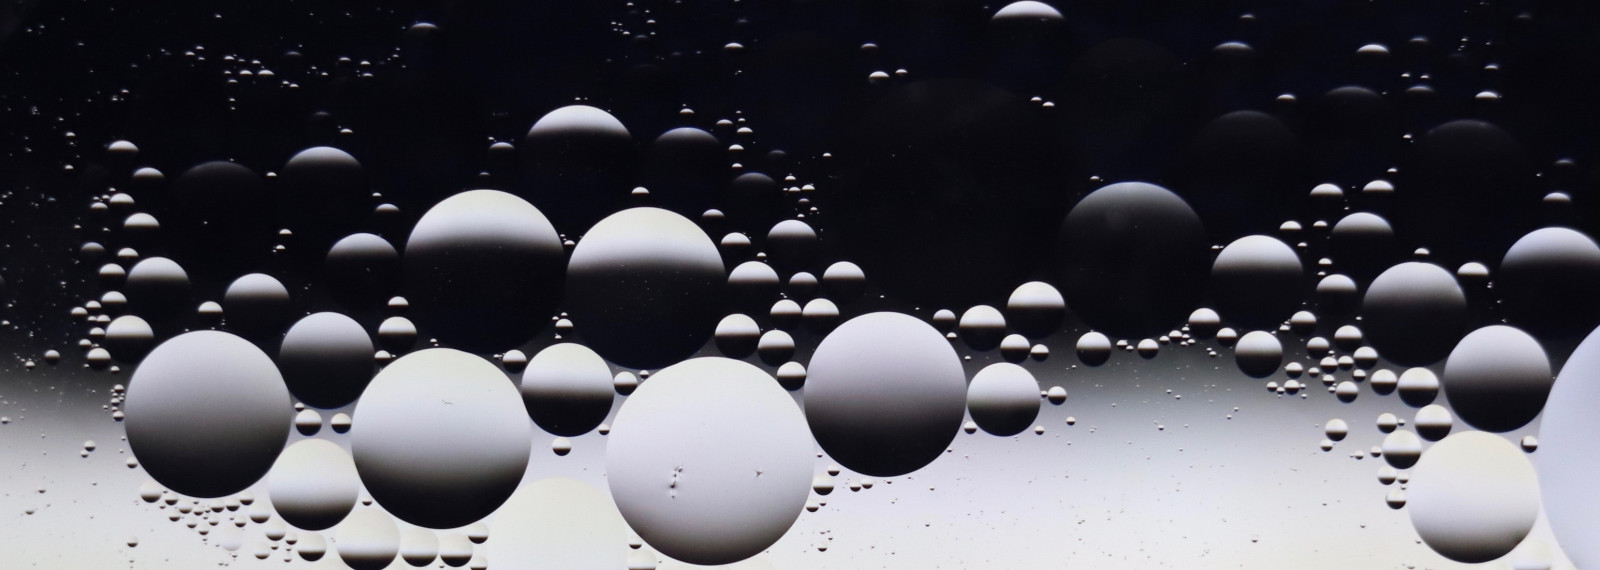 Image of circular droplets of water depicting light and shade